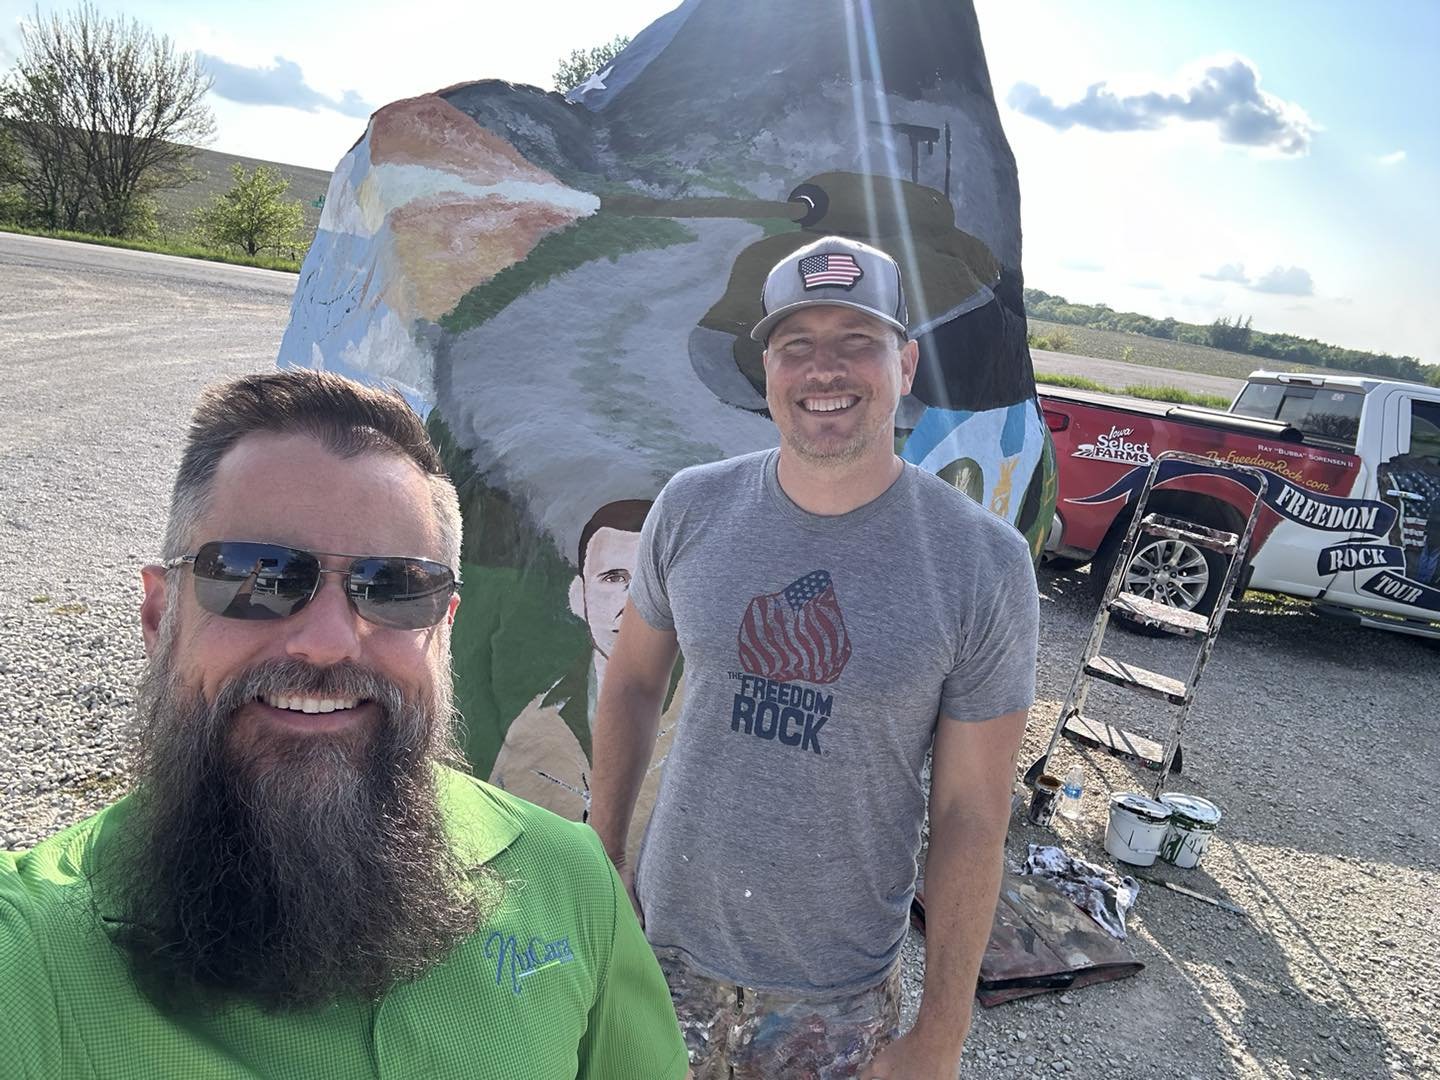 It was great to run into my friend, Rep. Ray Bubba Sorensen, who is the artist behind the Freedom Rocks. Did you know he redesigns the Adair County Freedom Rock every year for Memorial Day? I got to check out his 26th annual redesign! 🇺🇸